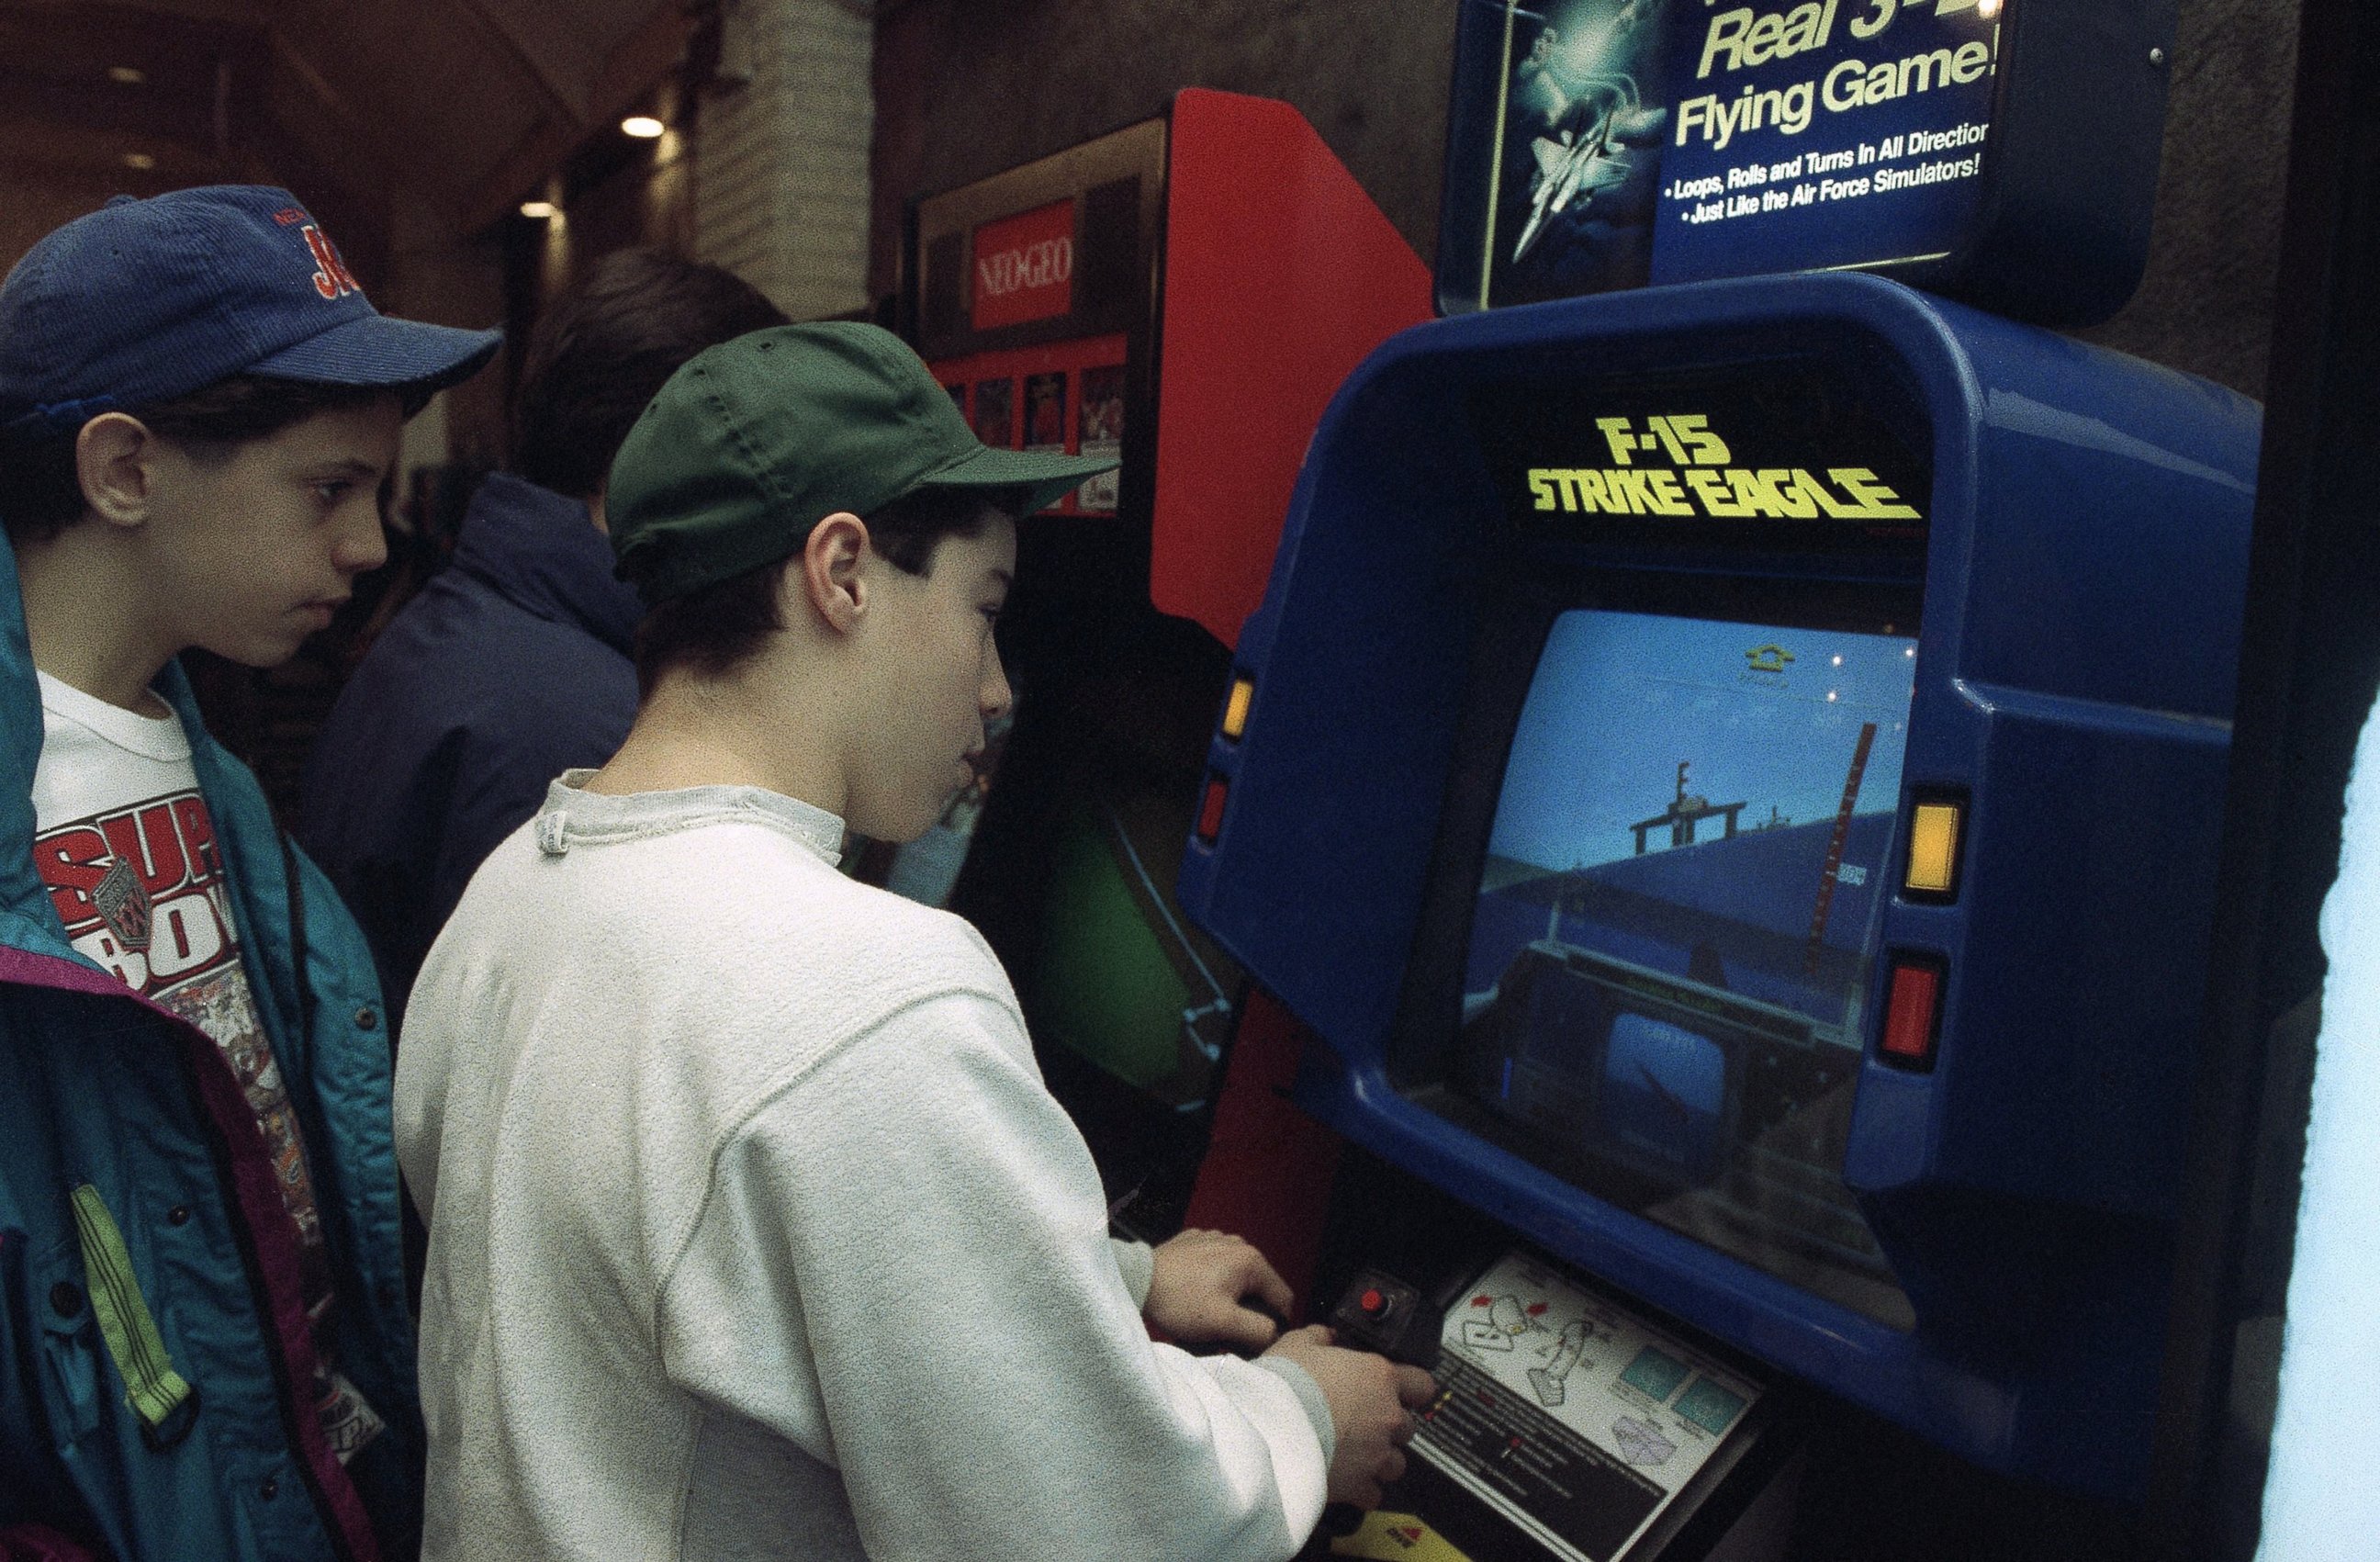 PHOTO: Raymond Freda plays the new F-15 Strike Eagle video game at an arcade in New York in this Jan. 28, 1991, file photo as his friend Brian Valenza looks on.
